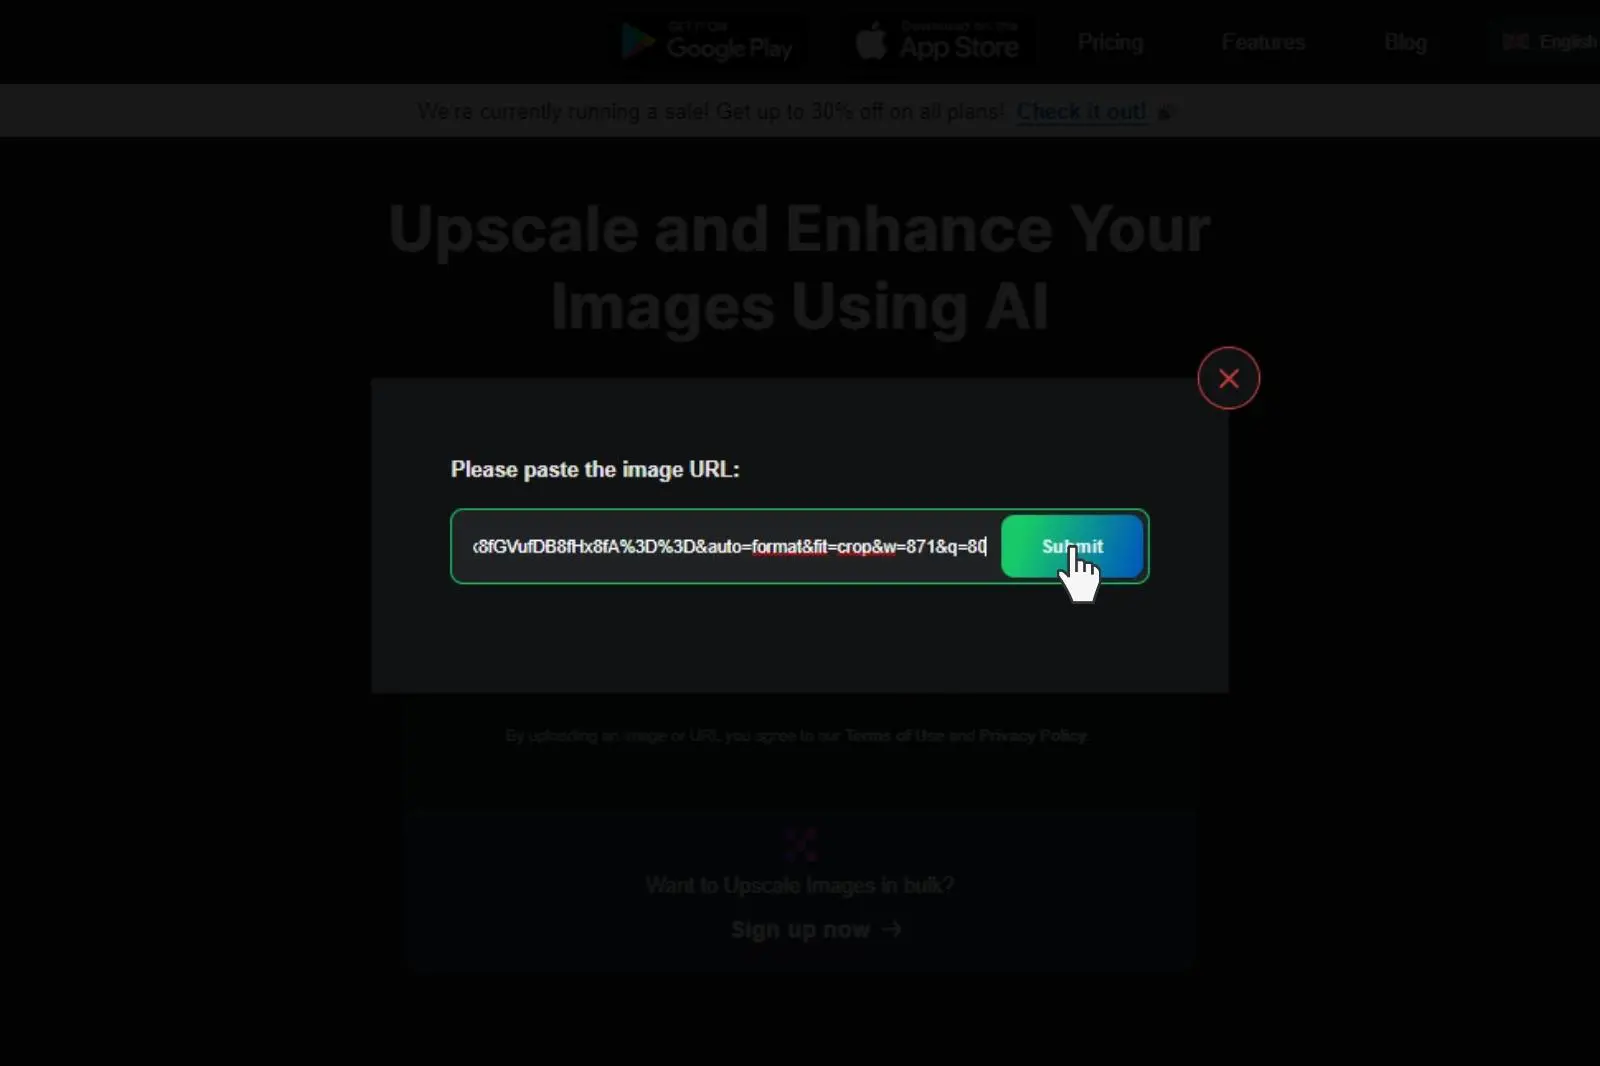 7th Step to Submit image URL